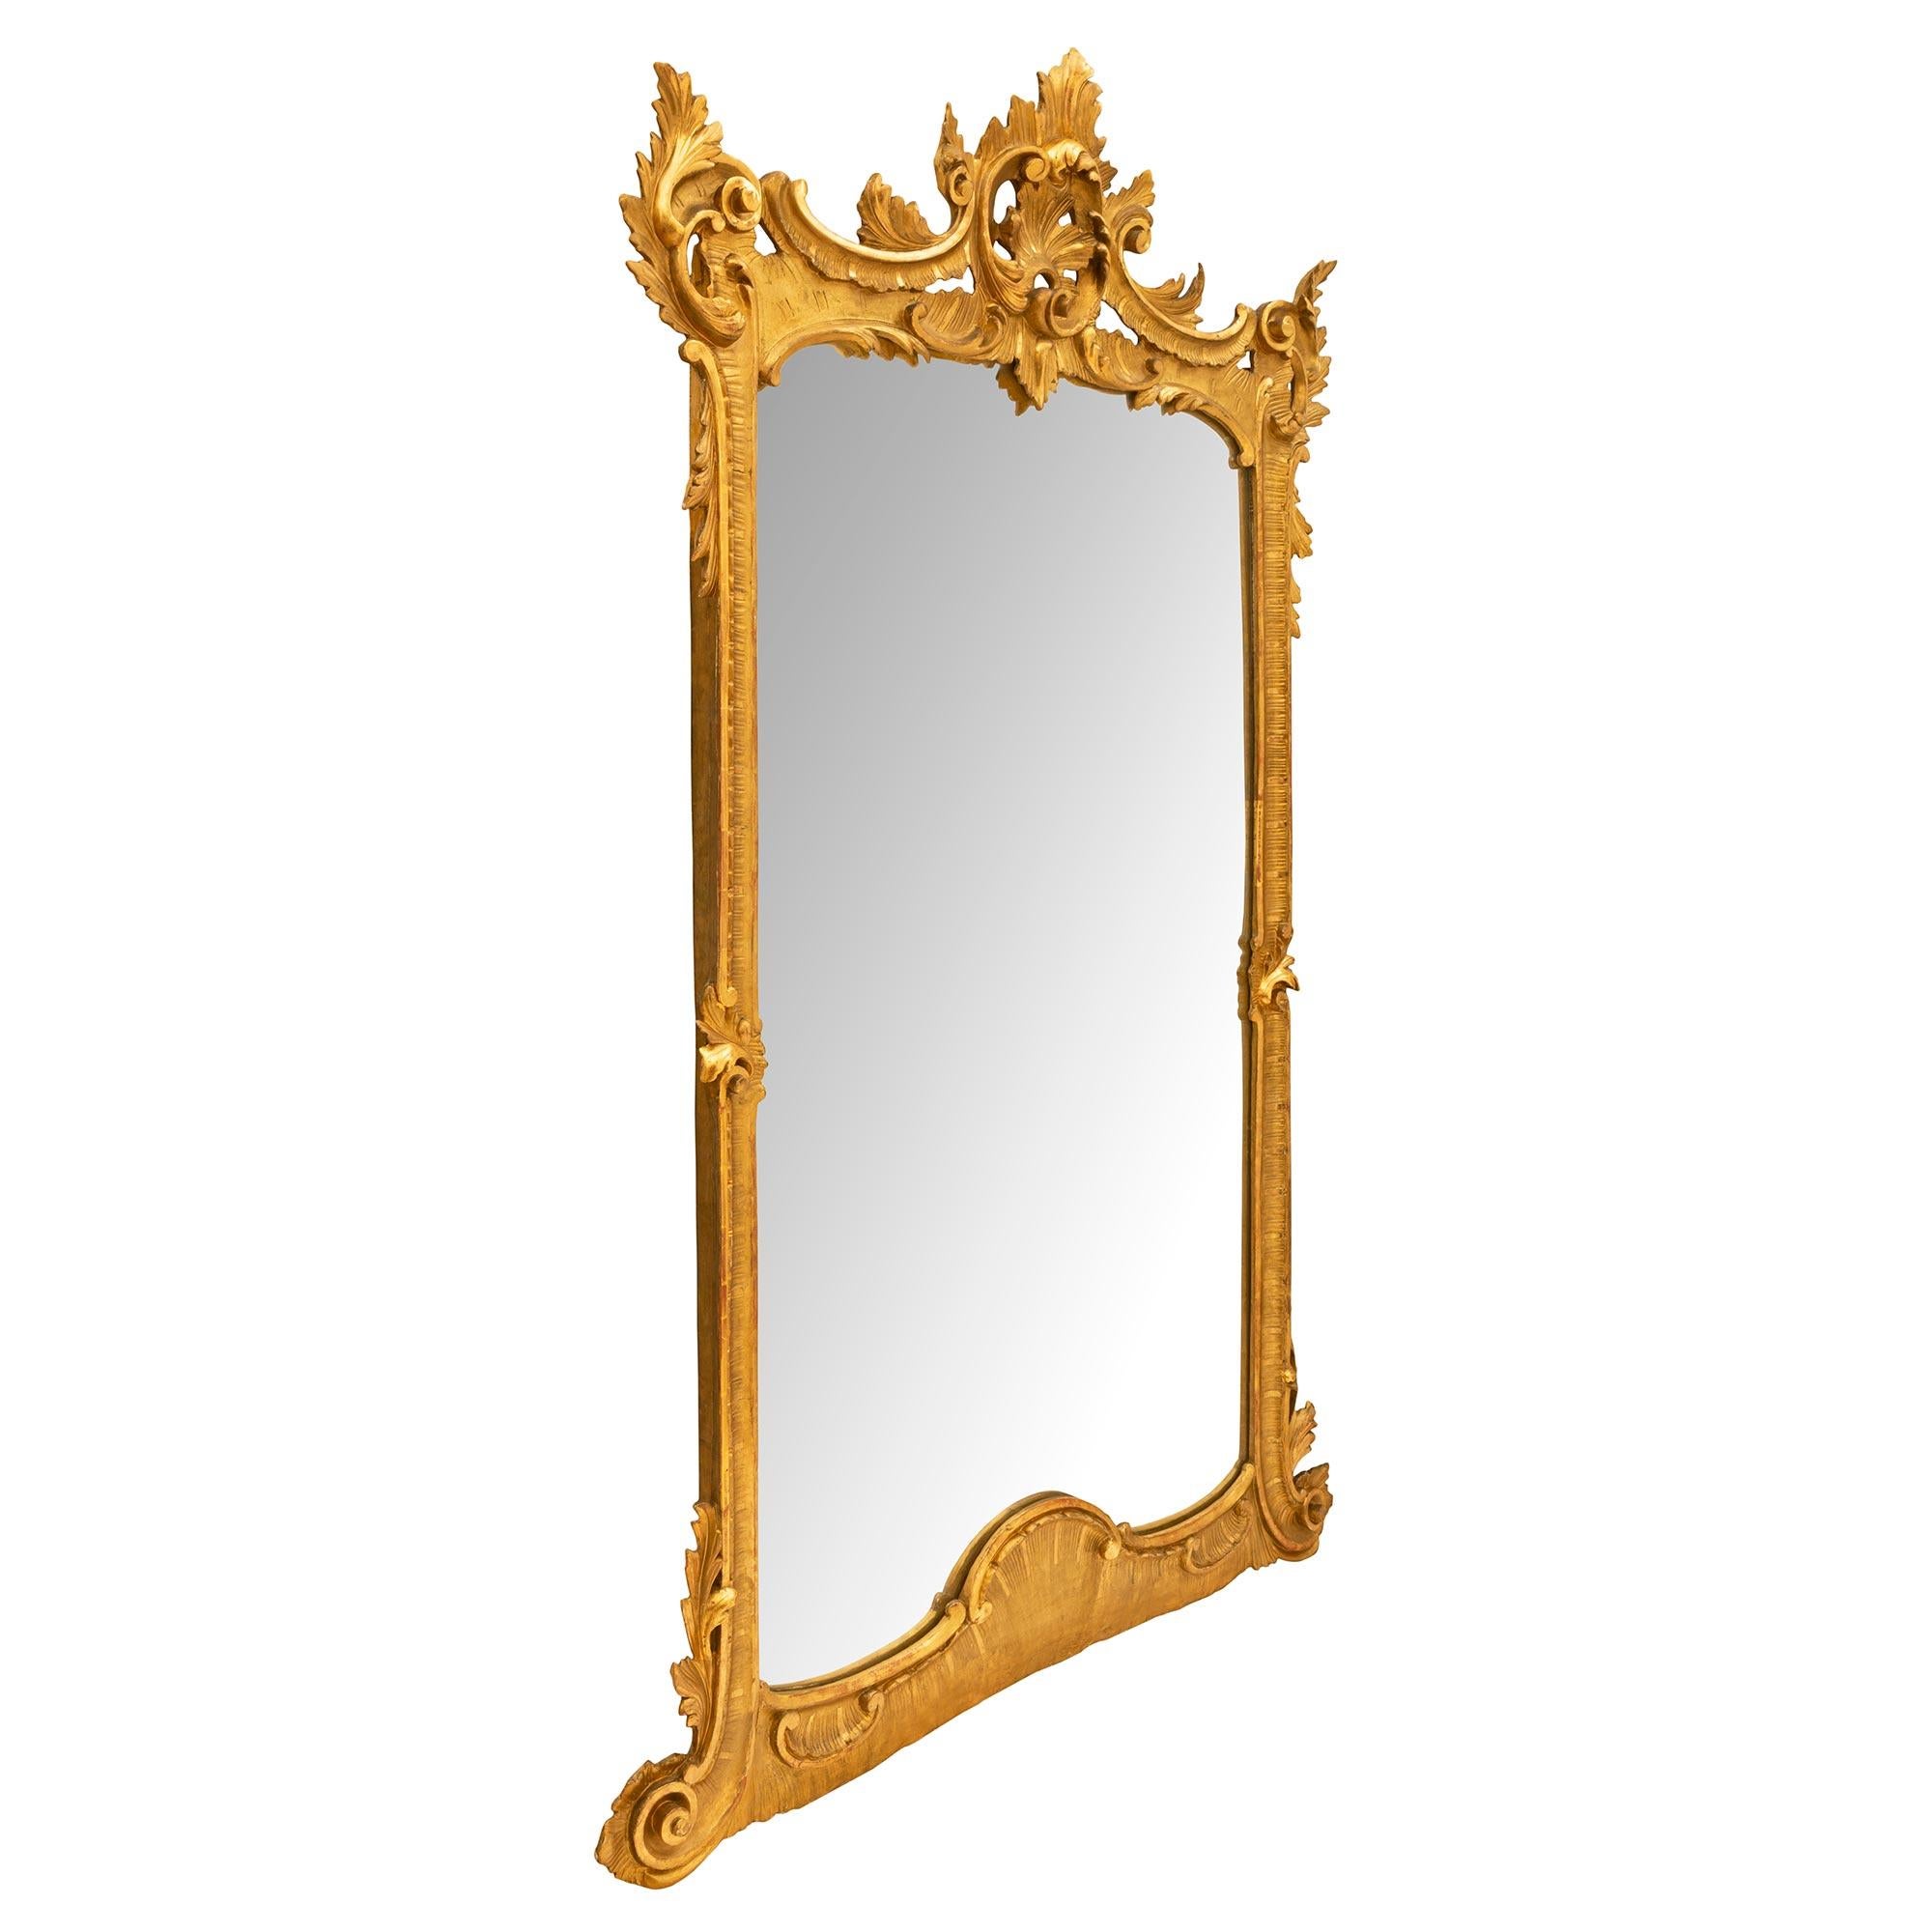  Italian 19th Century Giltwood Mirror In Good Condition For Sale In West Palm Beach, FL